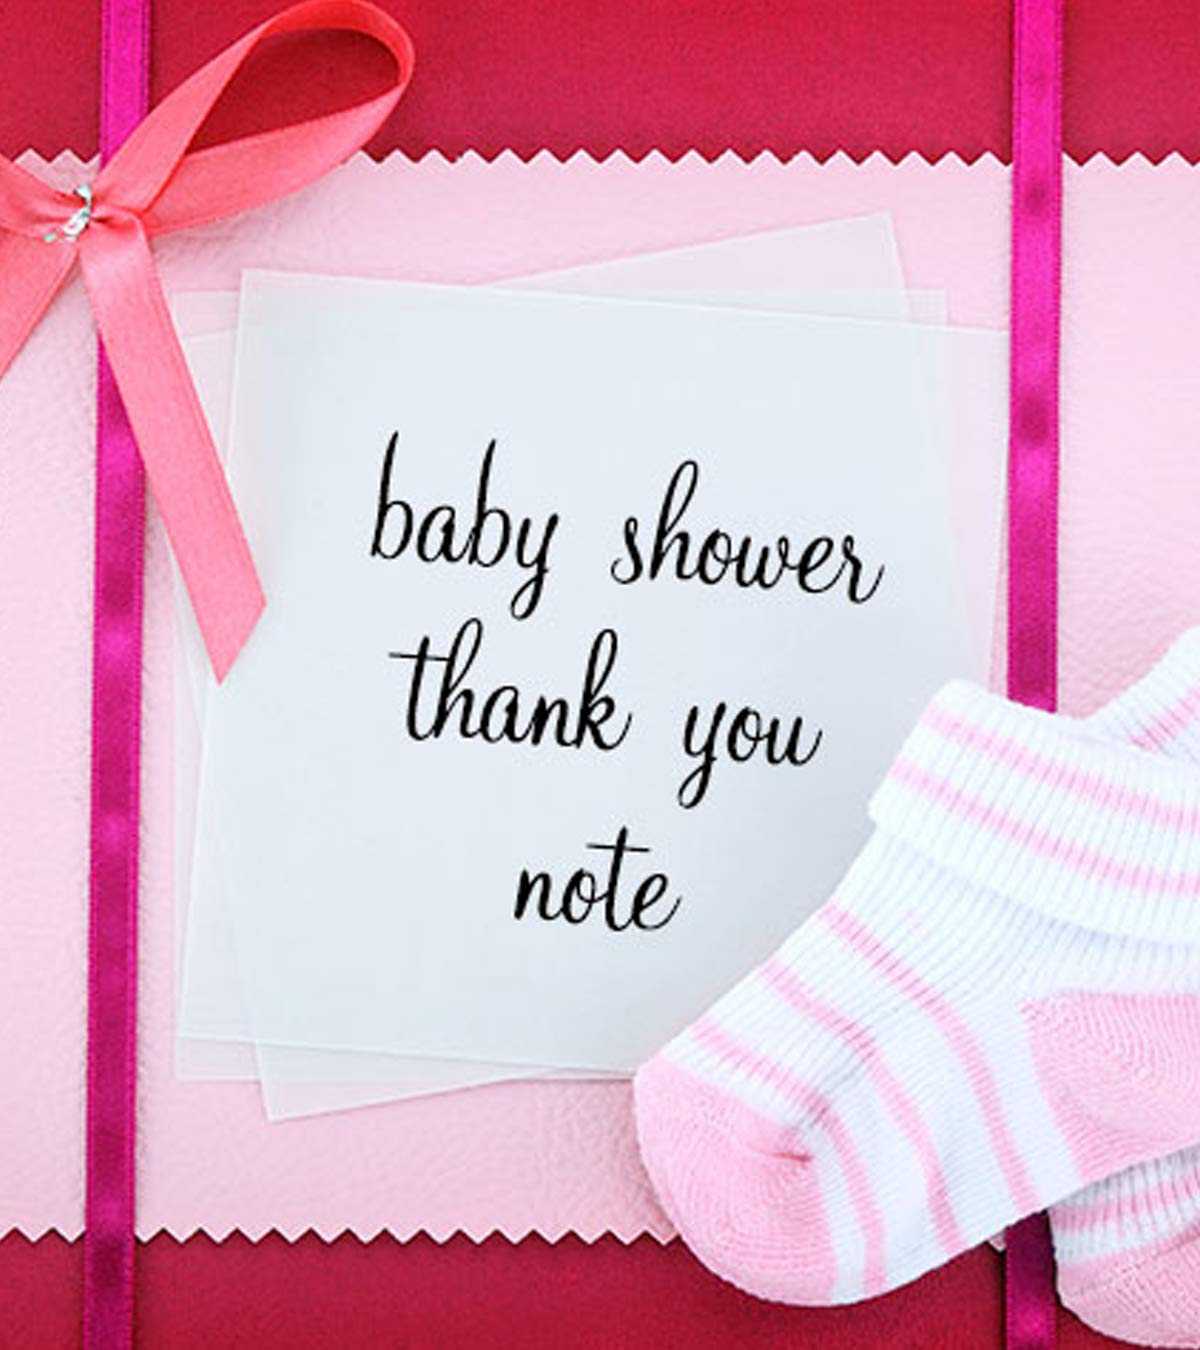 Baby Shower Thank You Notes: How To Write And What To Write With Thank You Card Template For Baby Shower